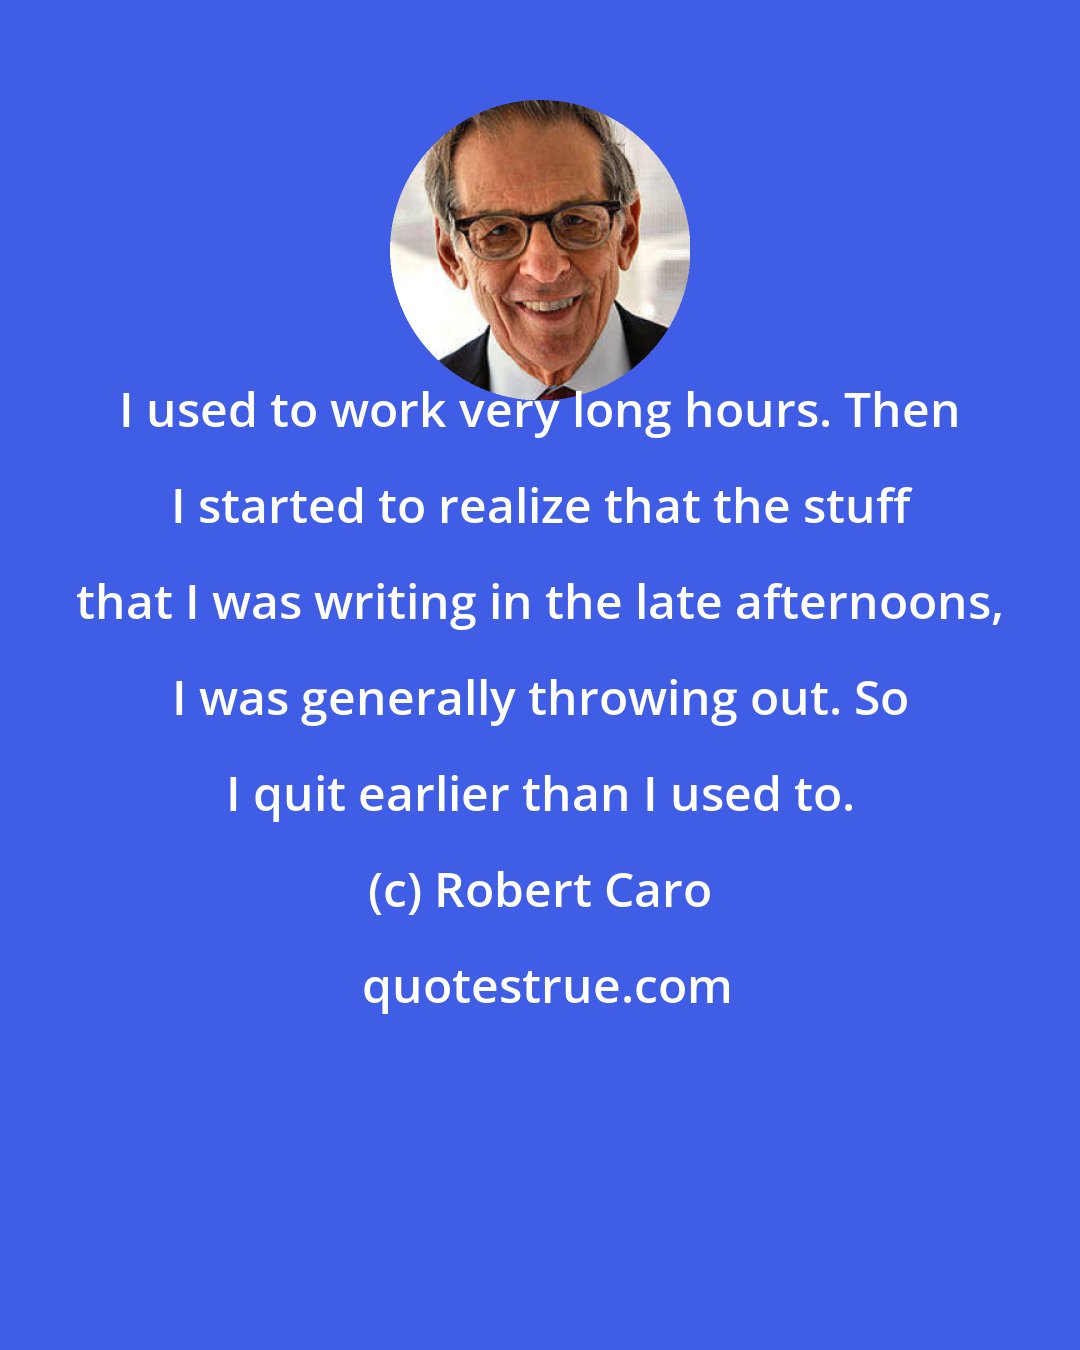 Robert Caro: I used to work very long hours. Then I started to realize that the stuff that I was writing in the late afternoons, I was generally throwing out. So I quit earlier than I used to.